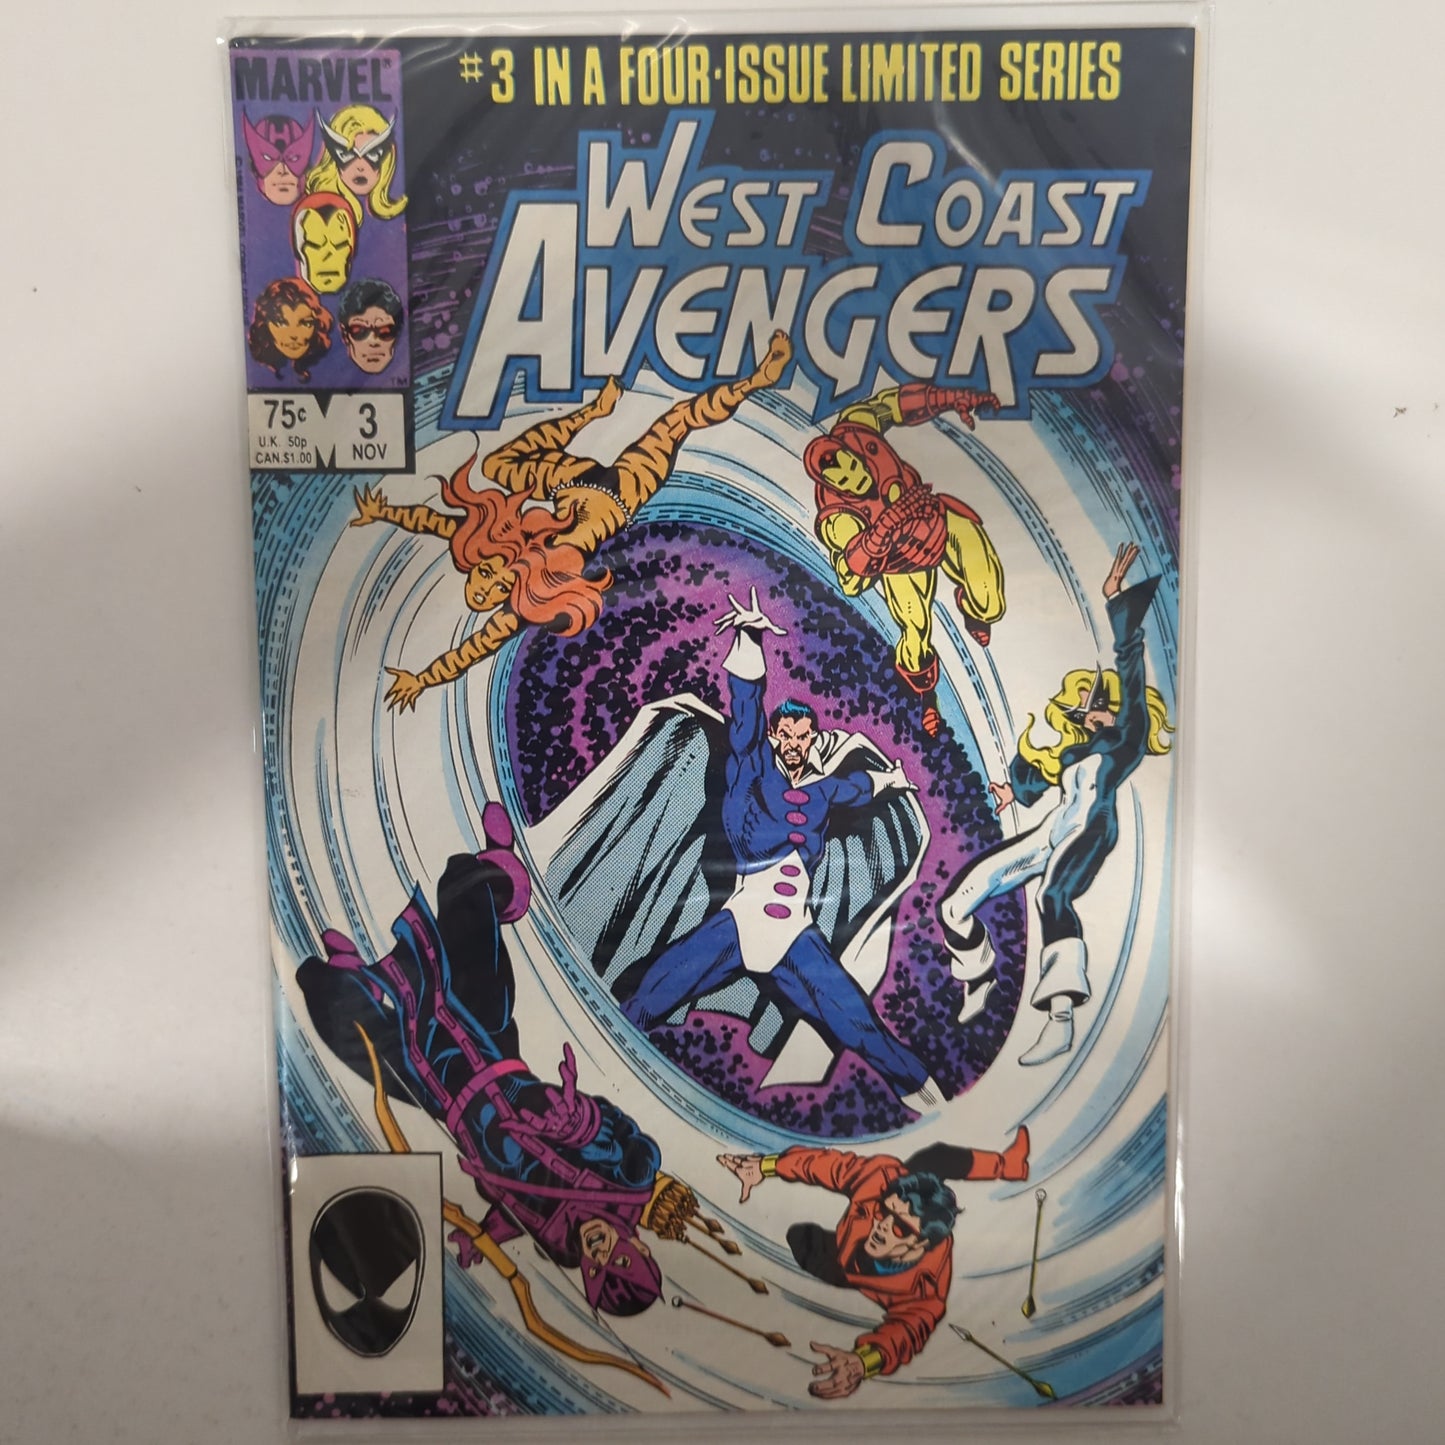 The west Coast Avengers Limited Series #3